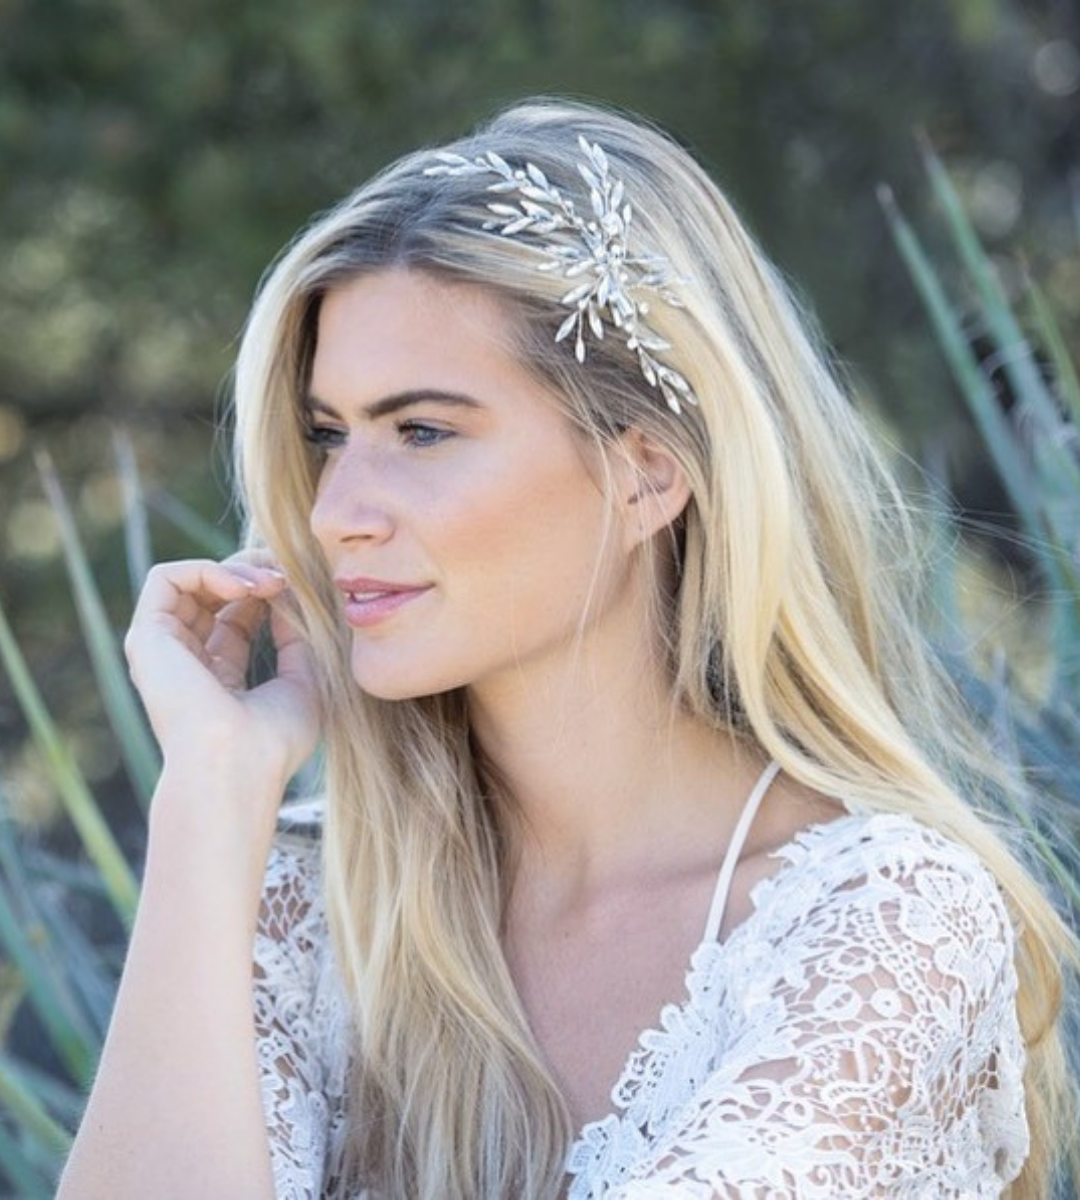 Woman wearing wedding hair piece by Ivory and co